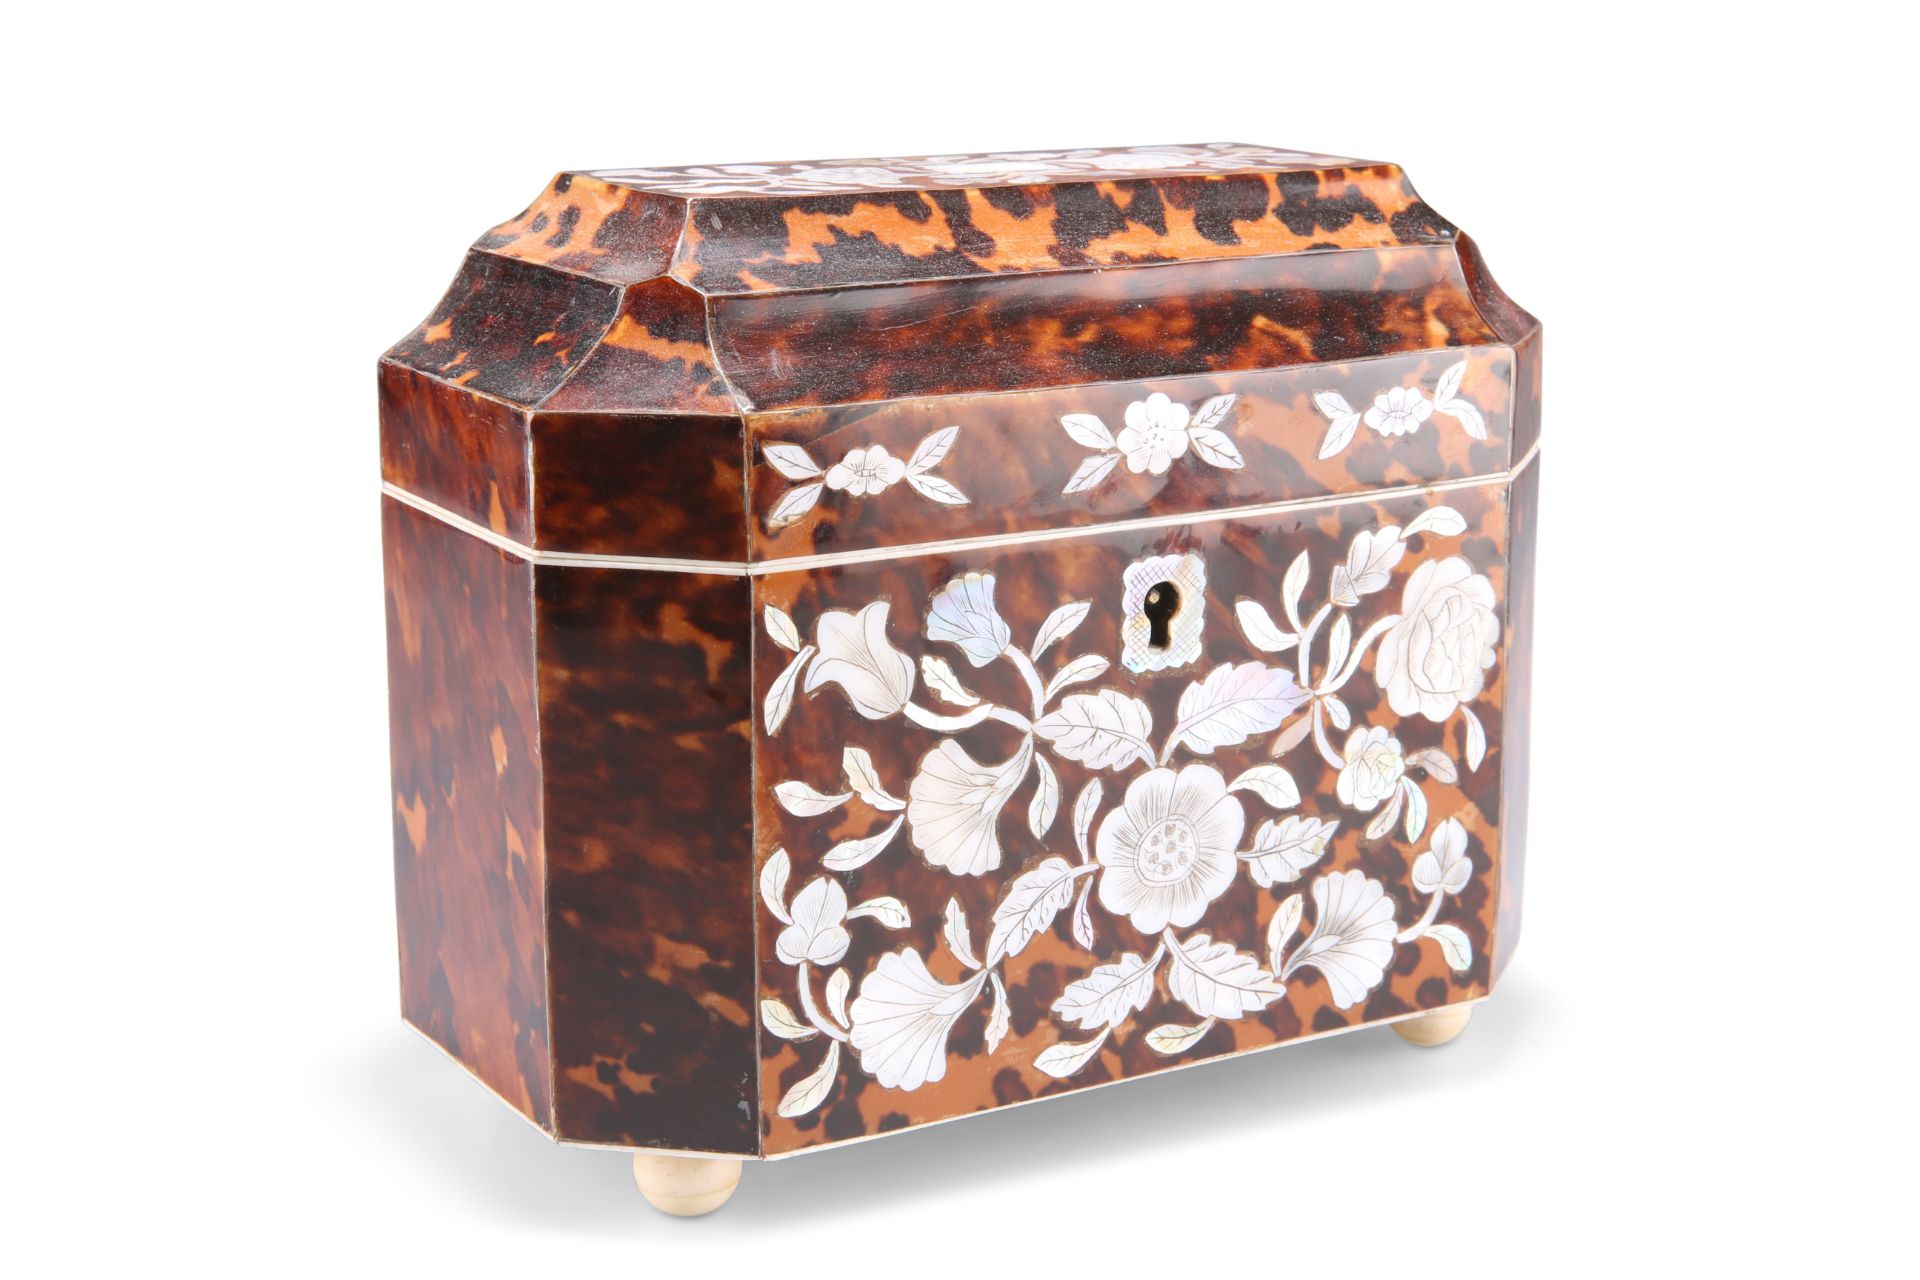 A GEORGE IV TORTOISESHELL AND MOTHER-OF-PEARL INLAID TEA CADDY